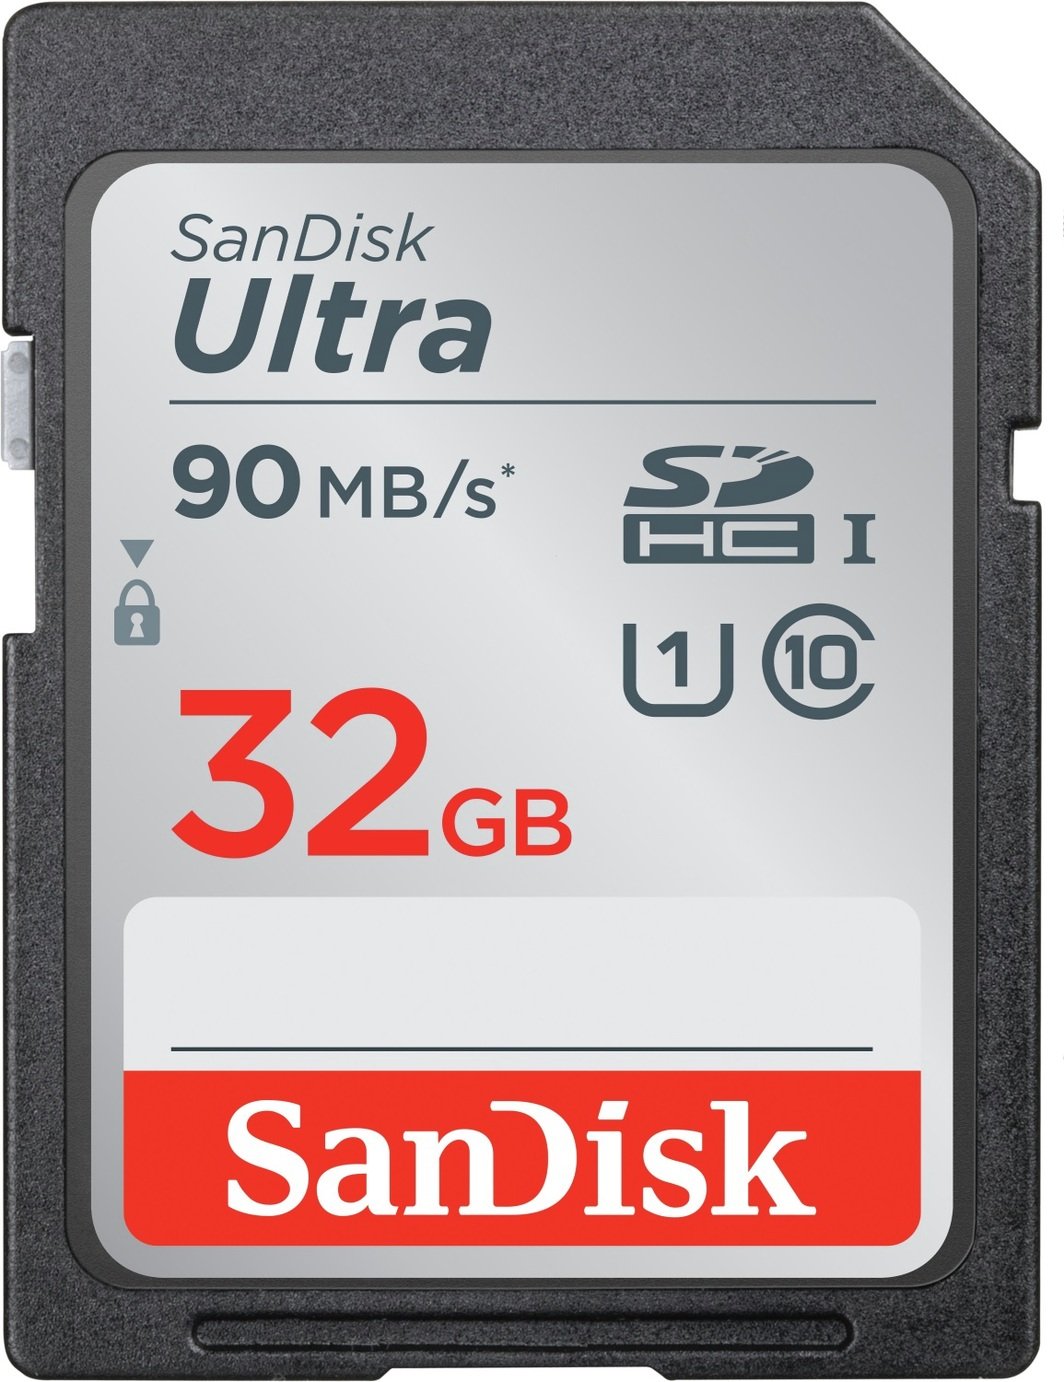 SanDisk Ultra UHS-I 90MB/s SDHC Memory Card Review